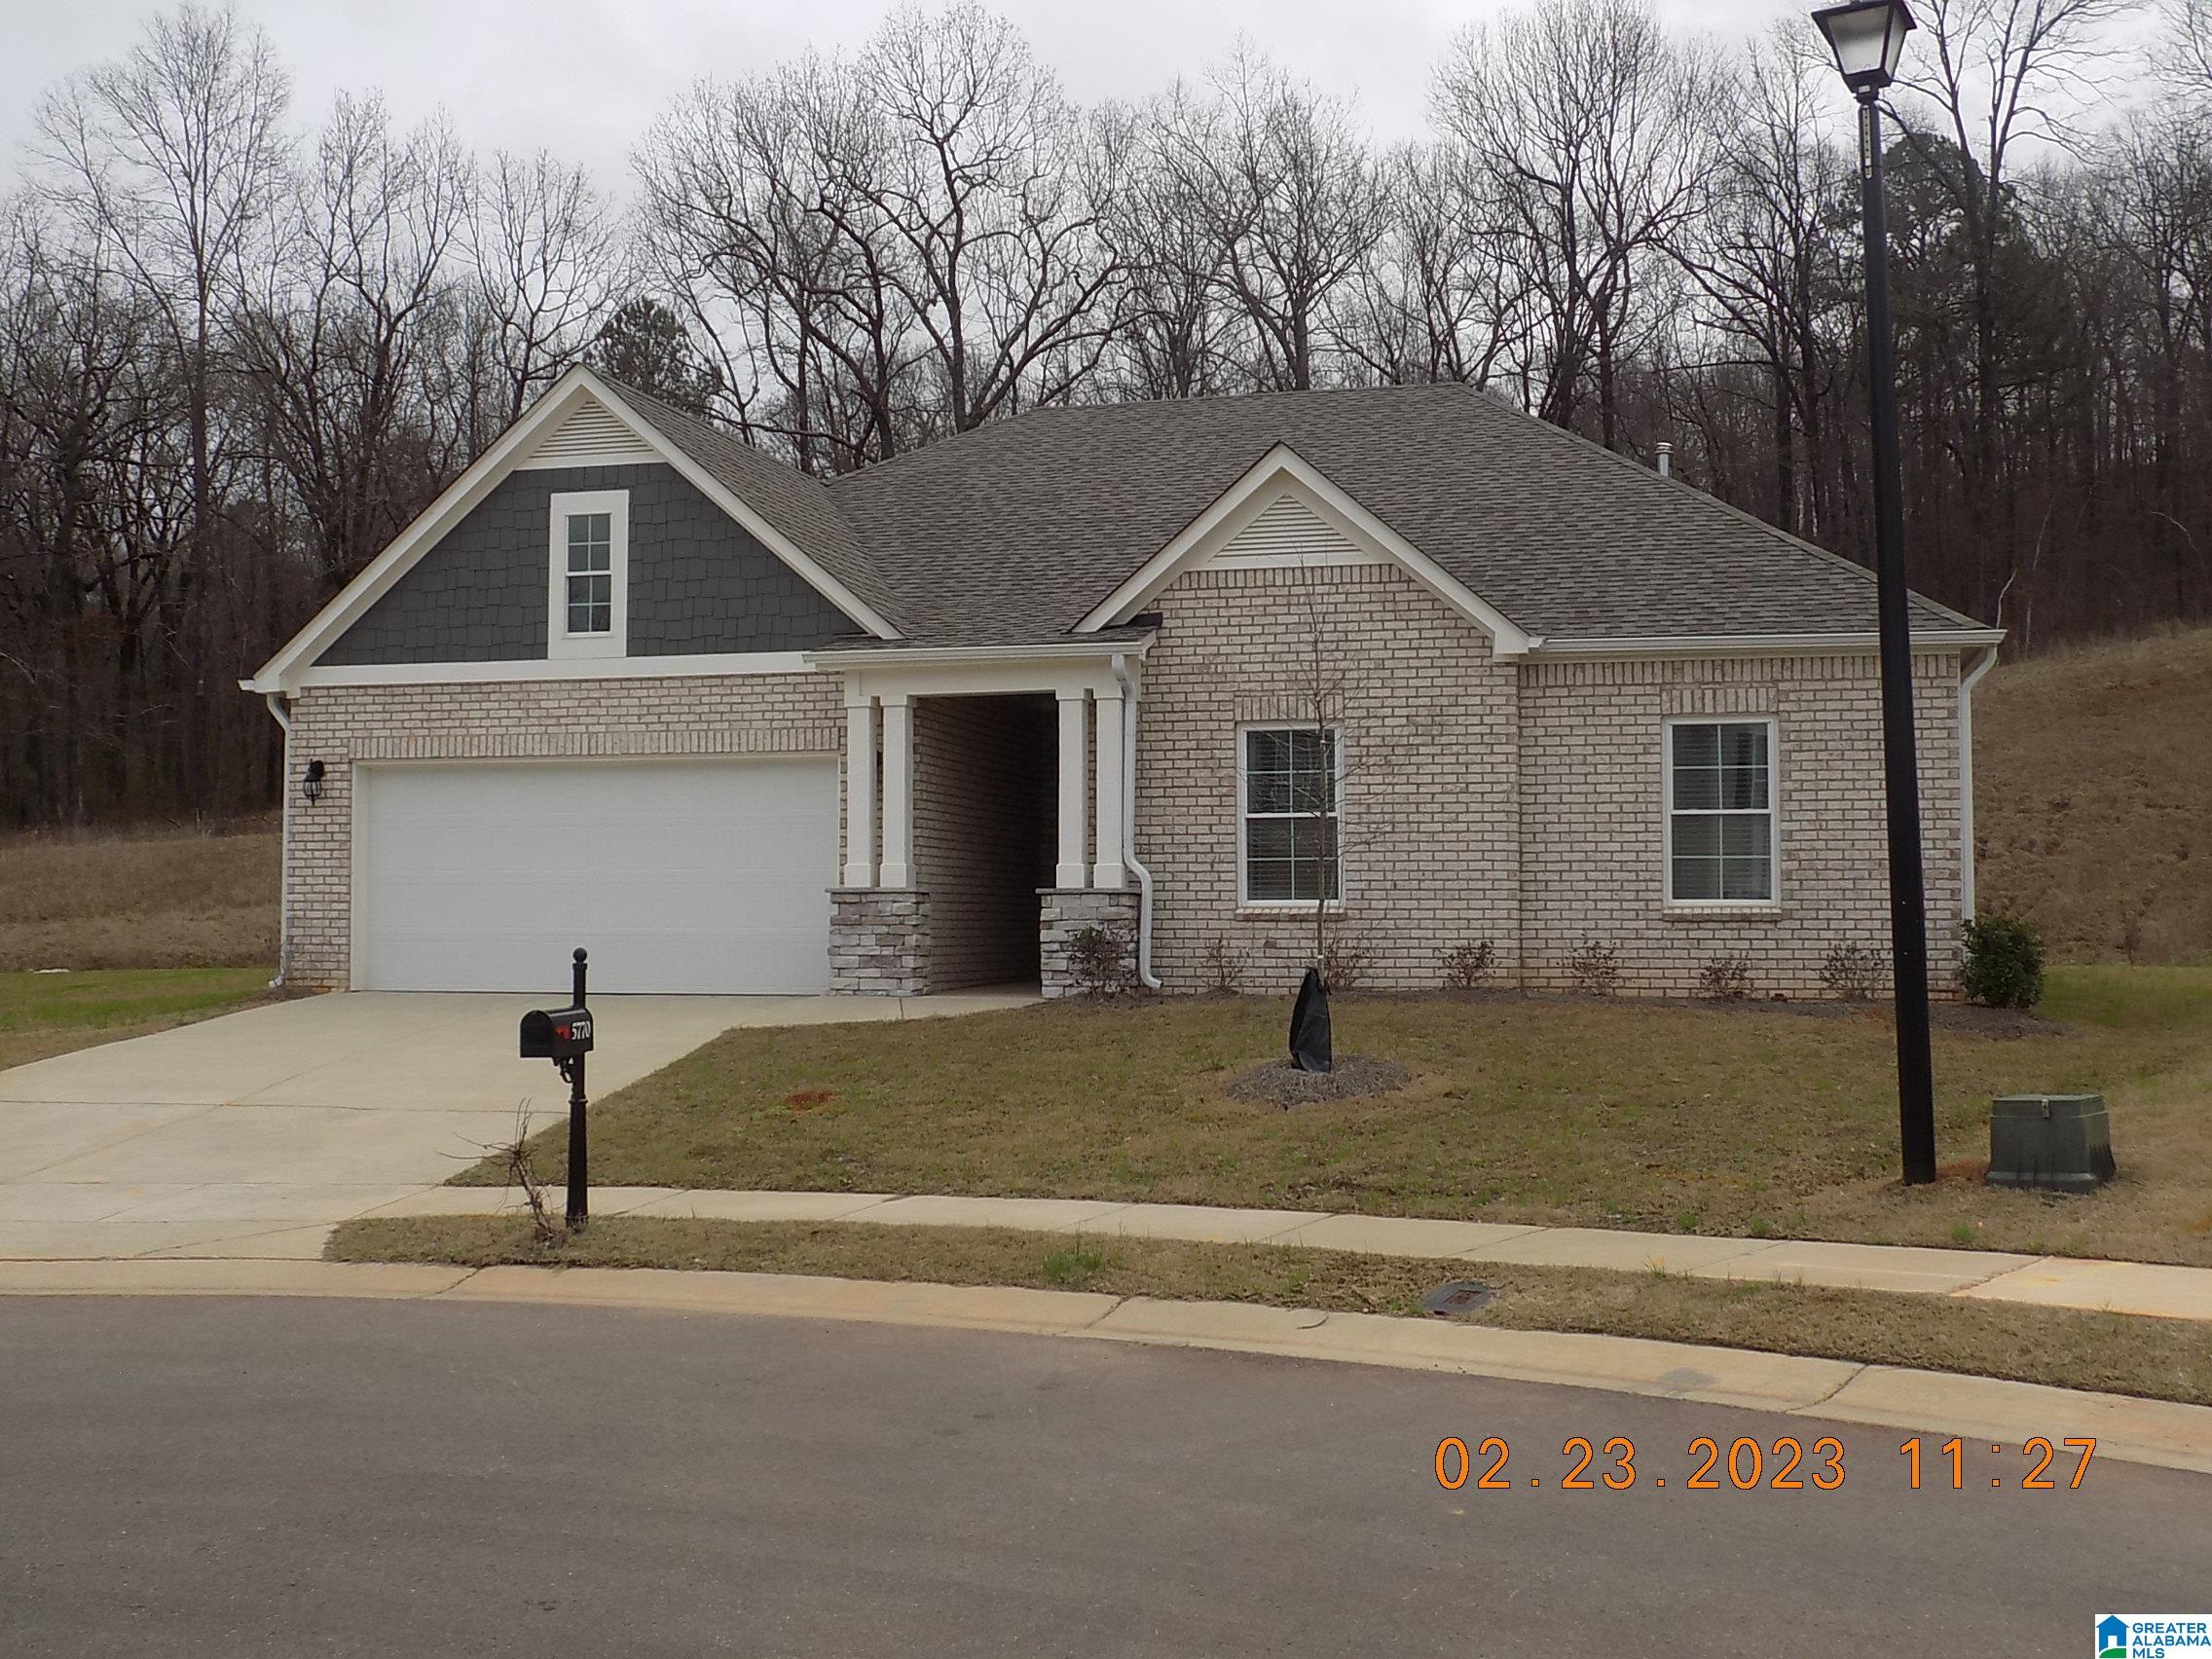 Photo of 5770 MOUNTAIN VIEW TRAIL BESSEMER